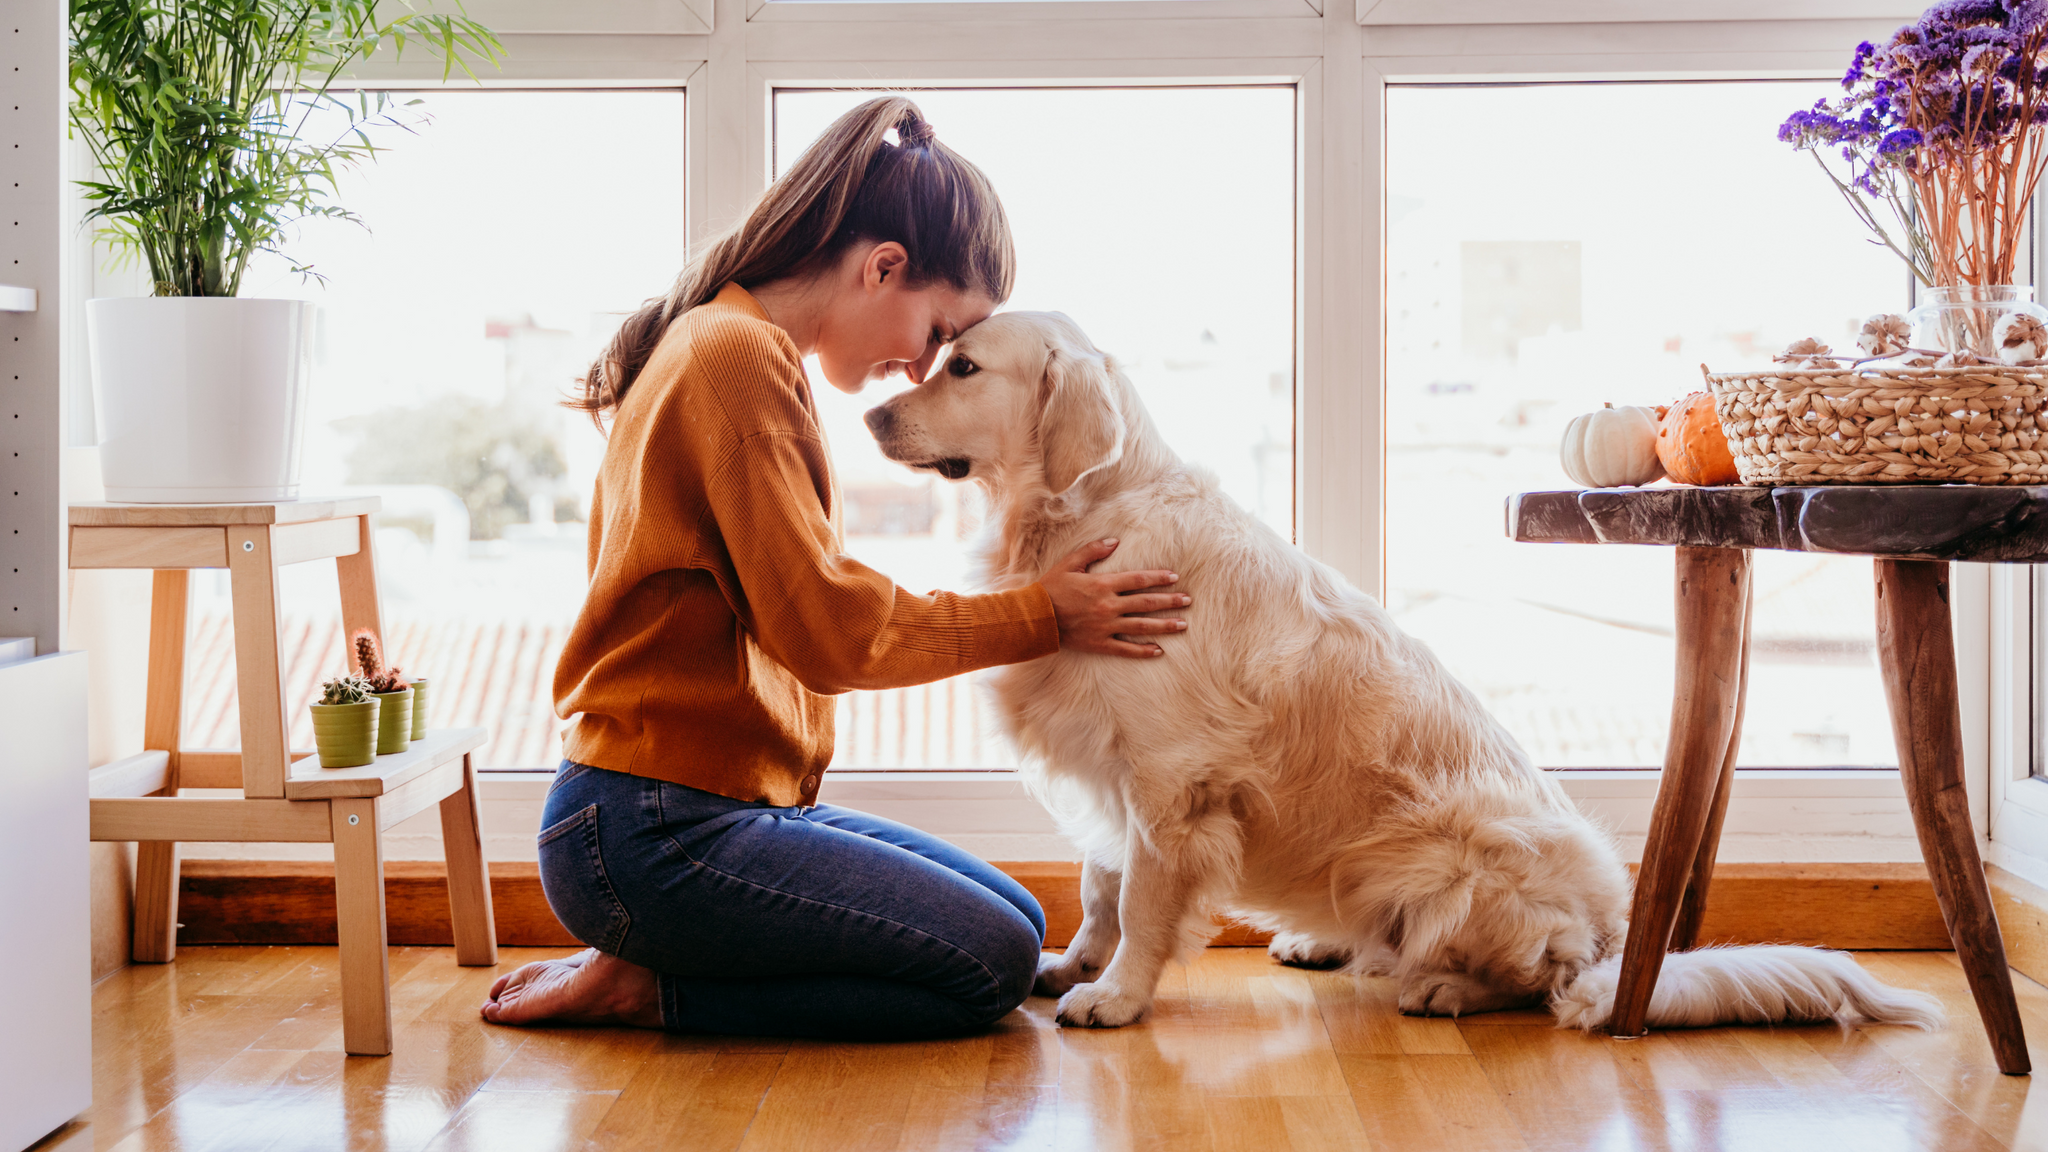 Creating a Lasting Bond: Building a Strong Relationship with Your Pet